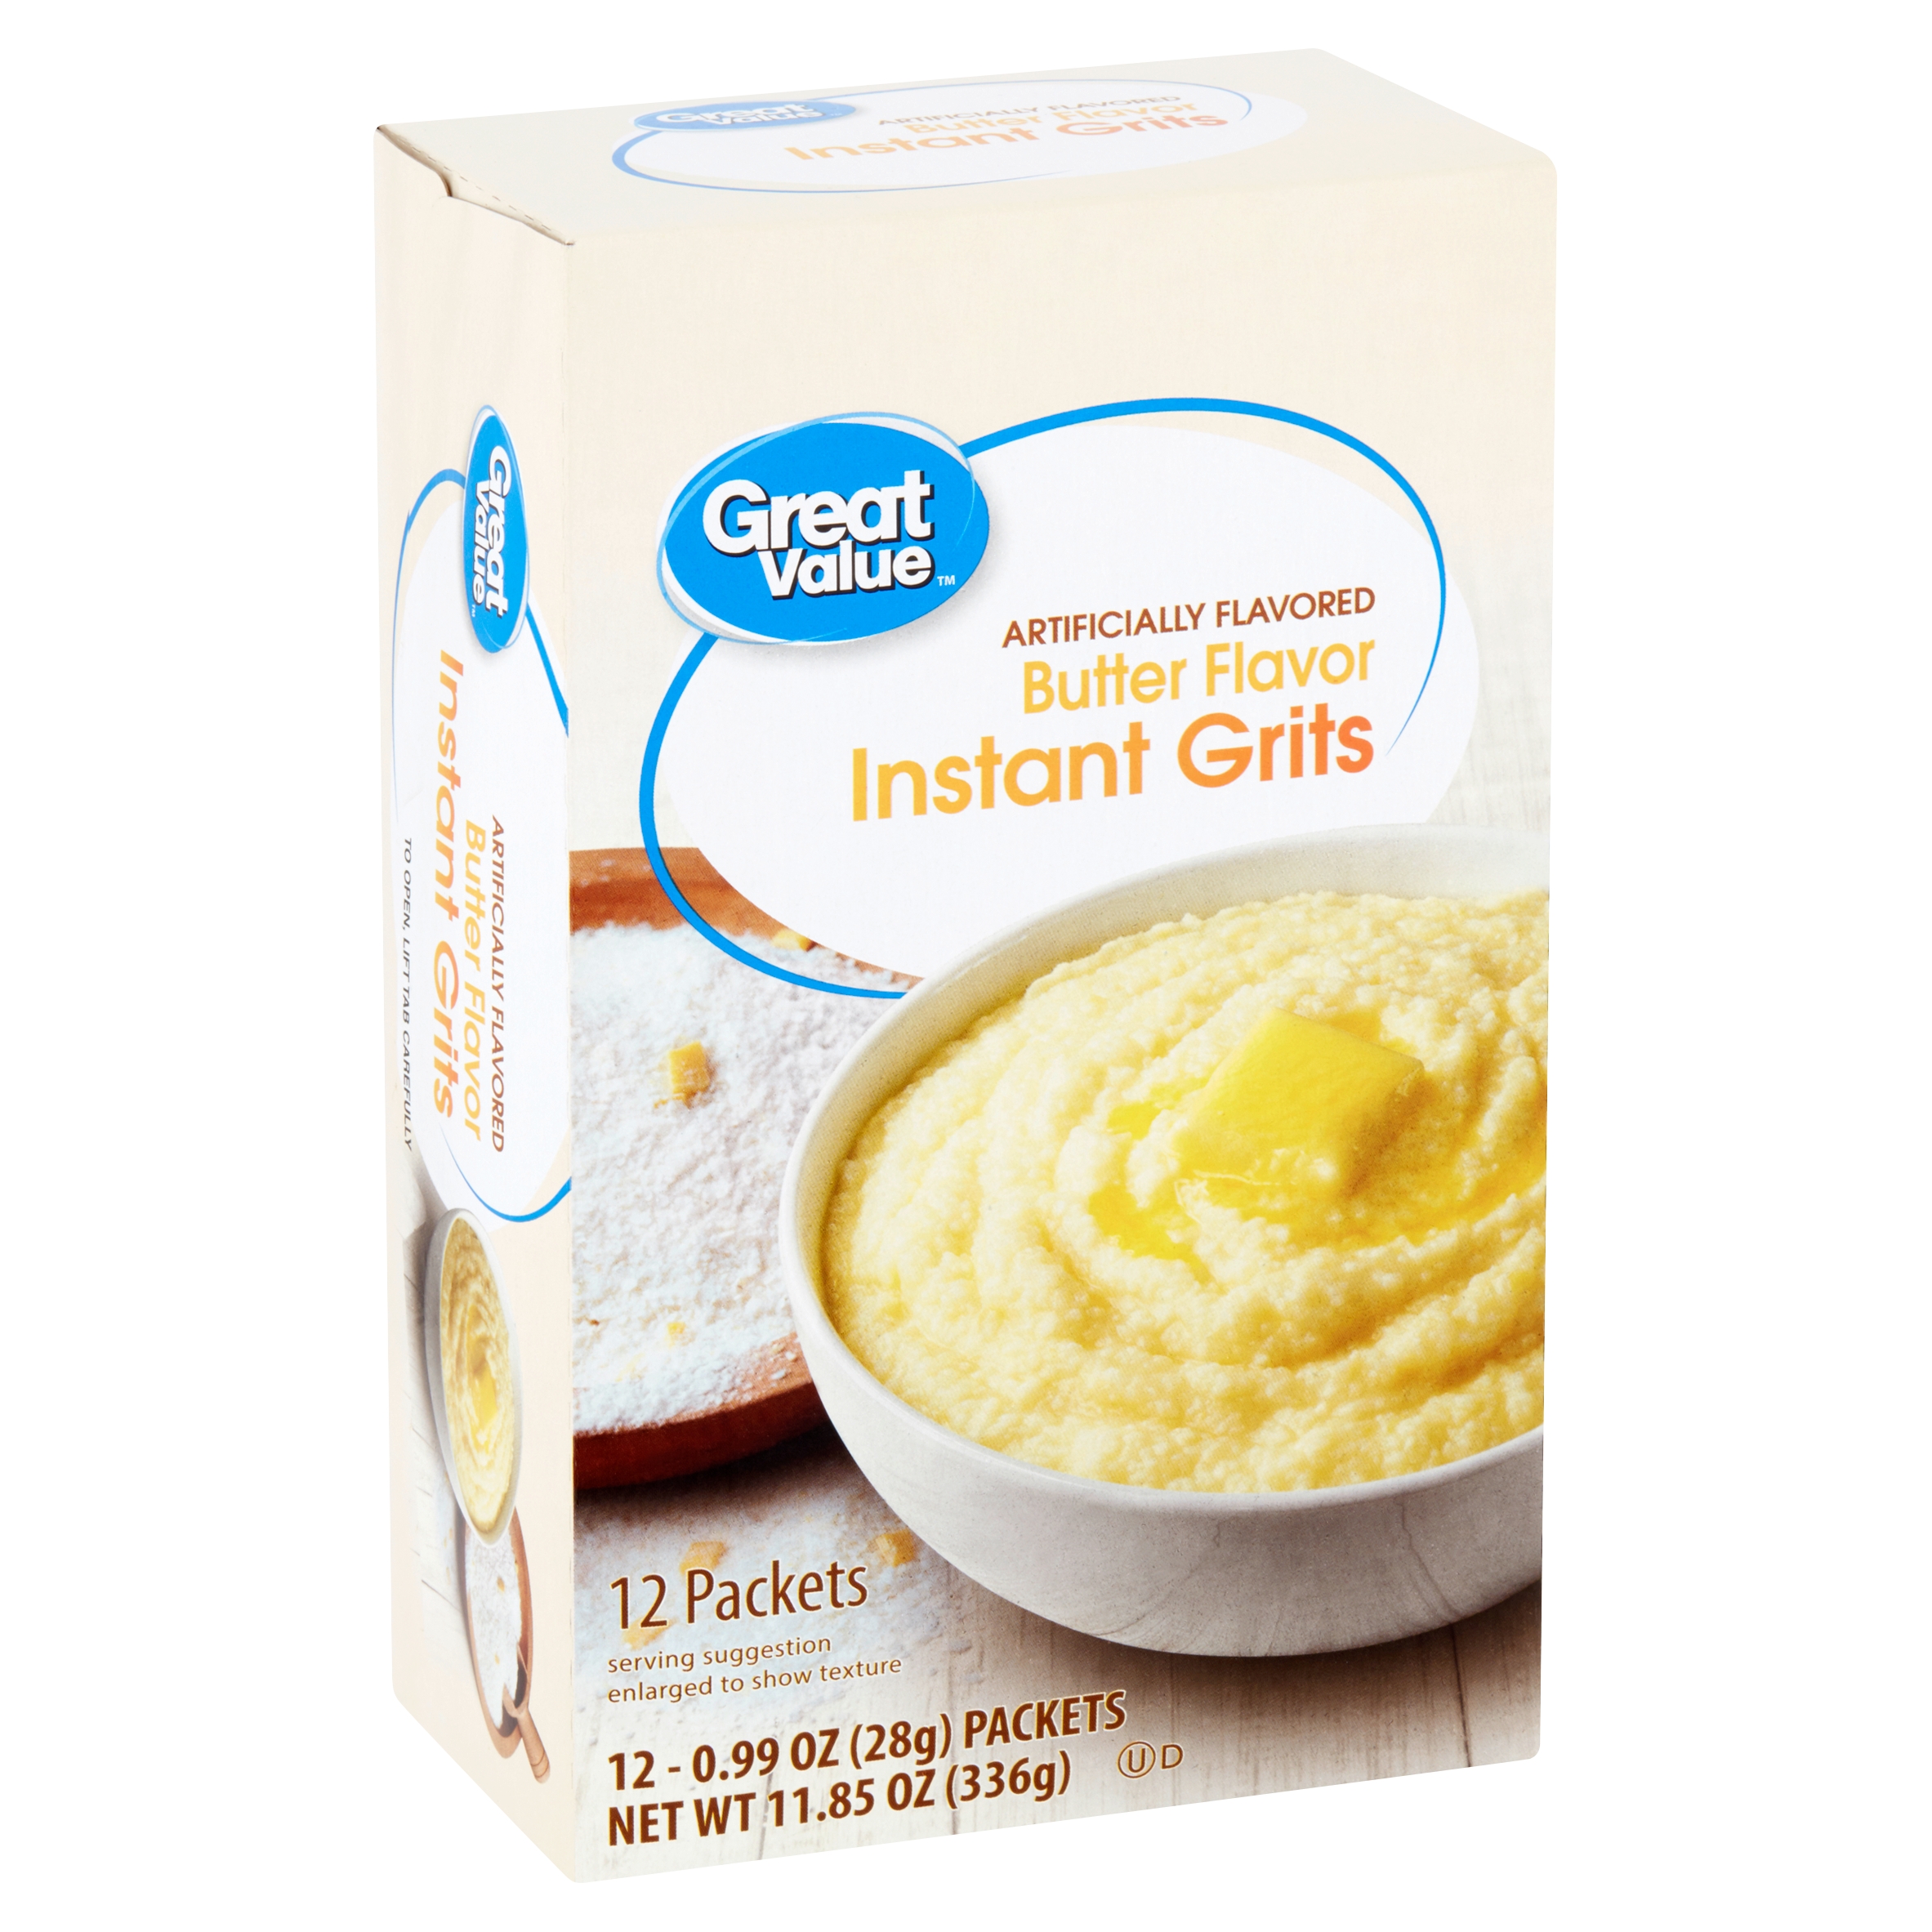 Great Value Butter Flavor Instant Grits, 12 Count Image